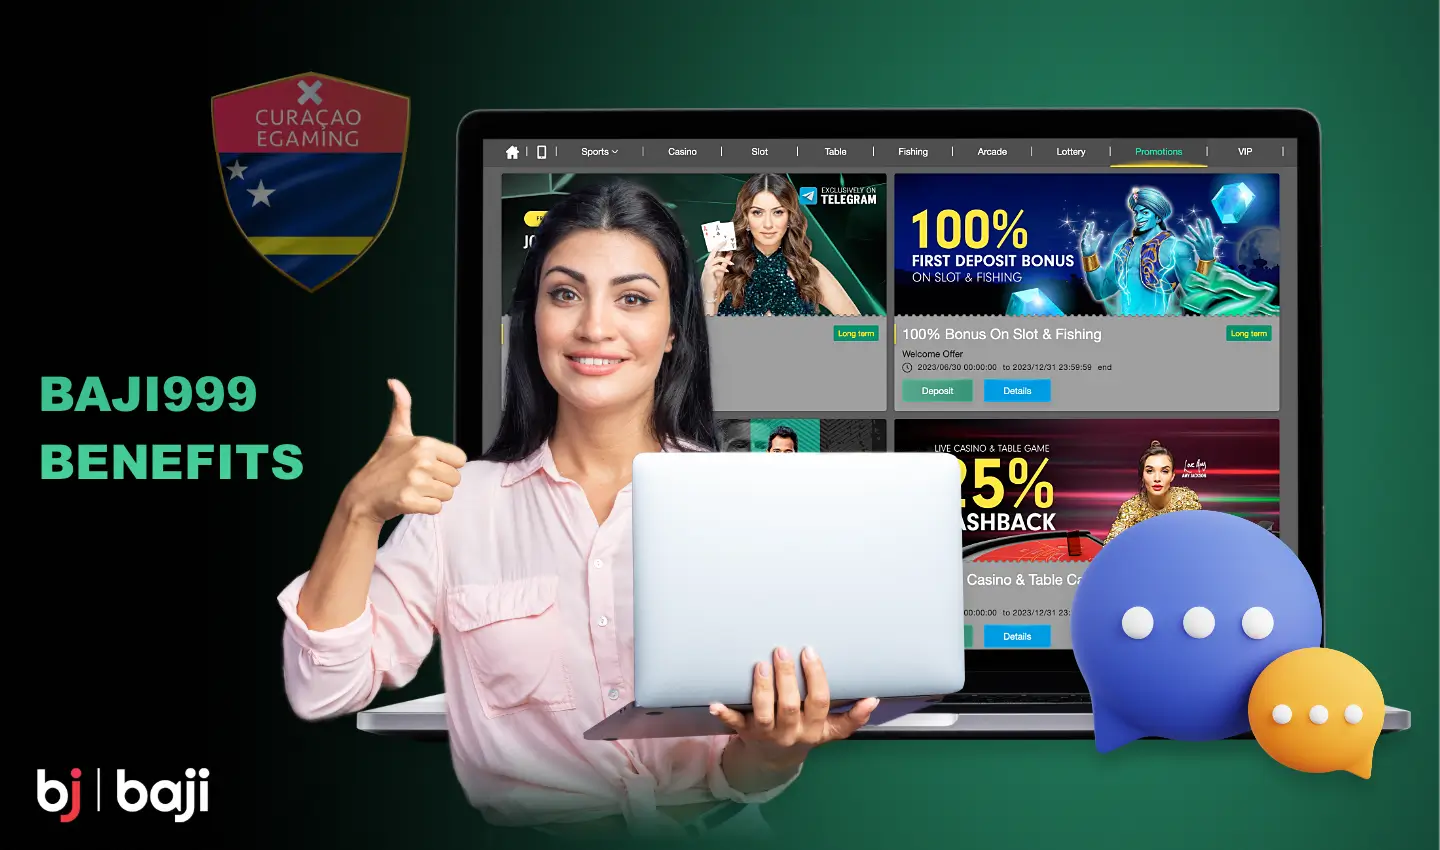 Baji999 offers various benefits to its Bangladeshi users, ranging from a huge number of casino games to generous bonuses